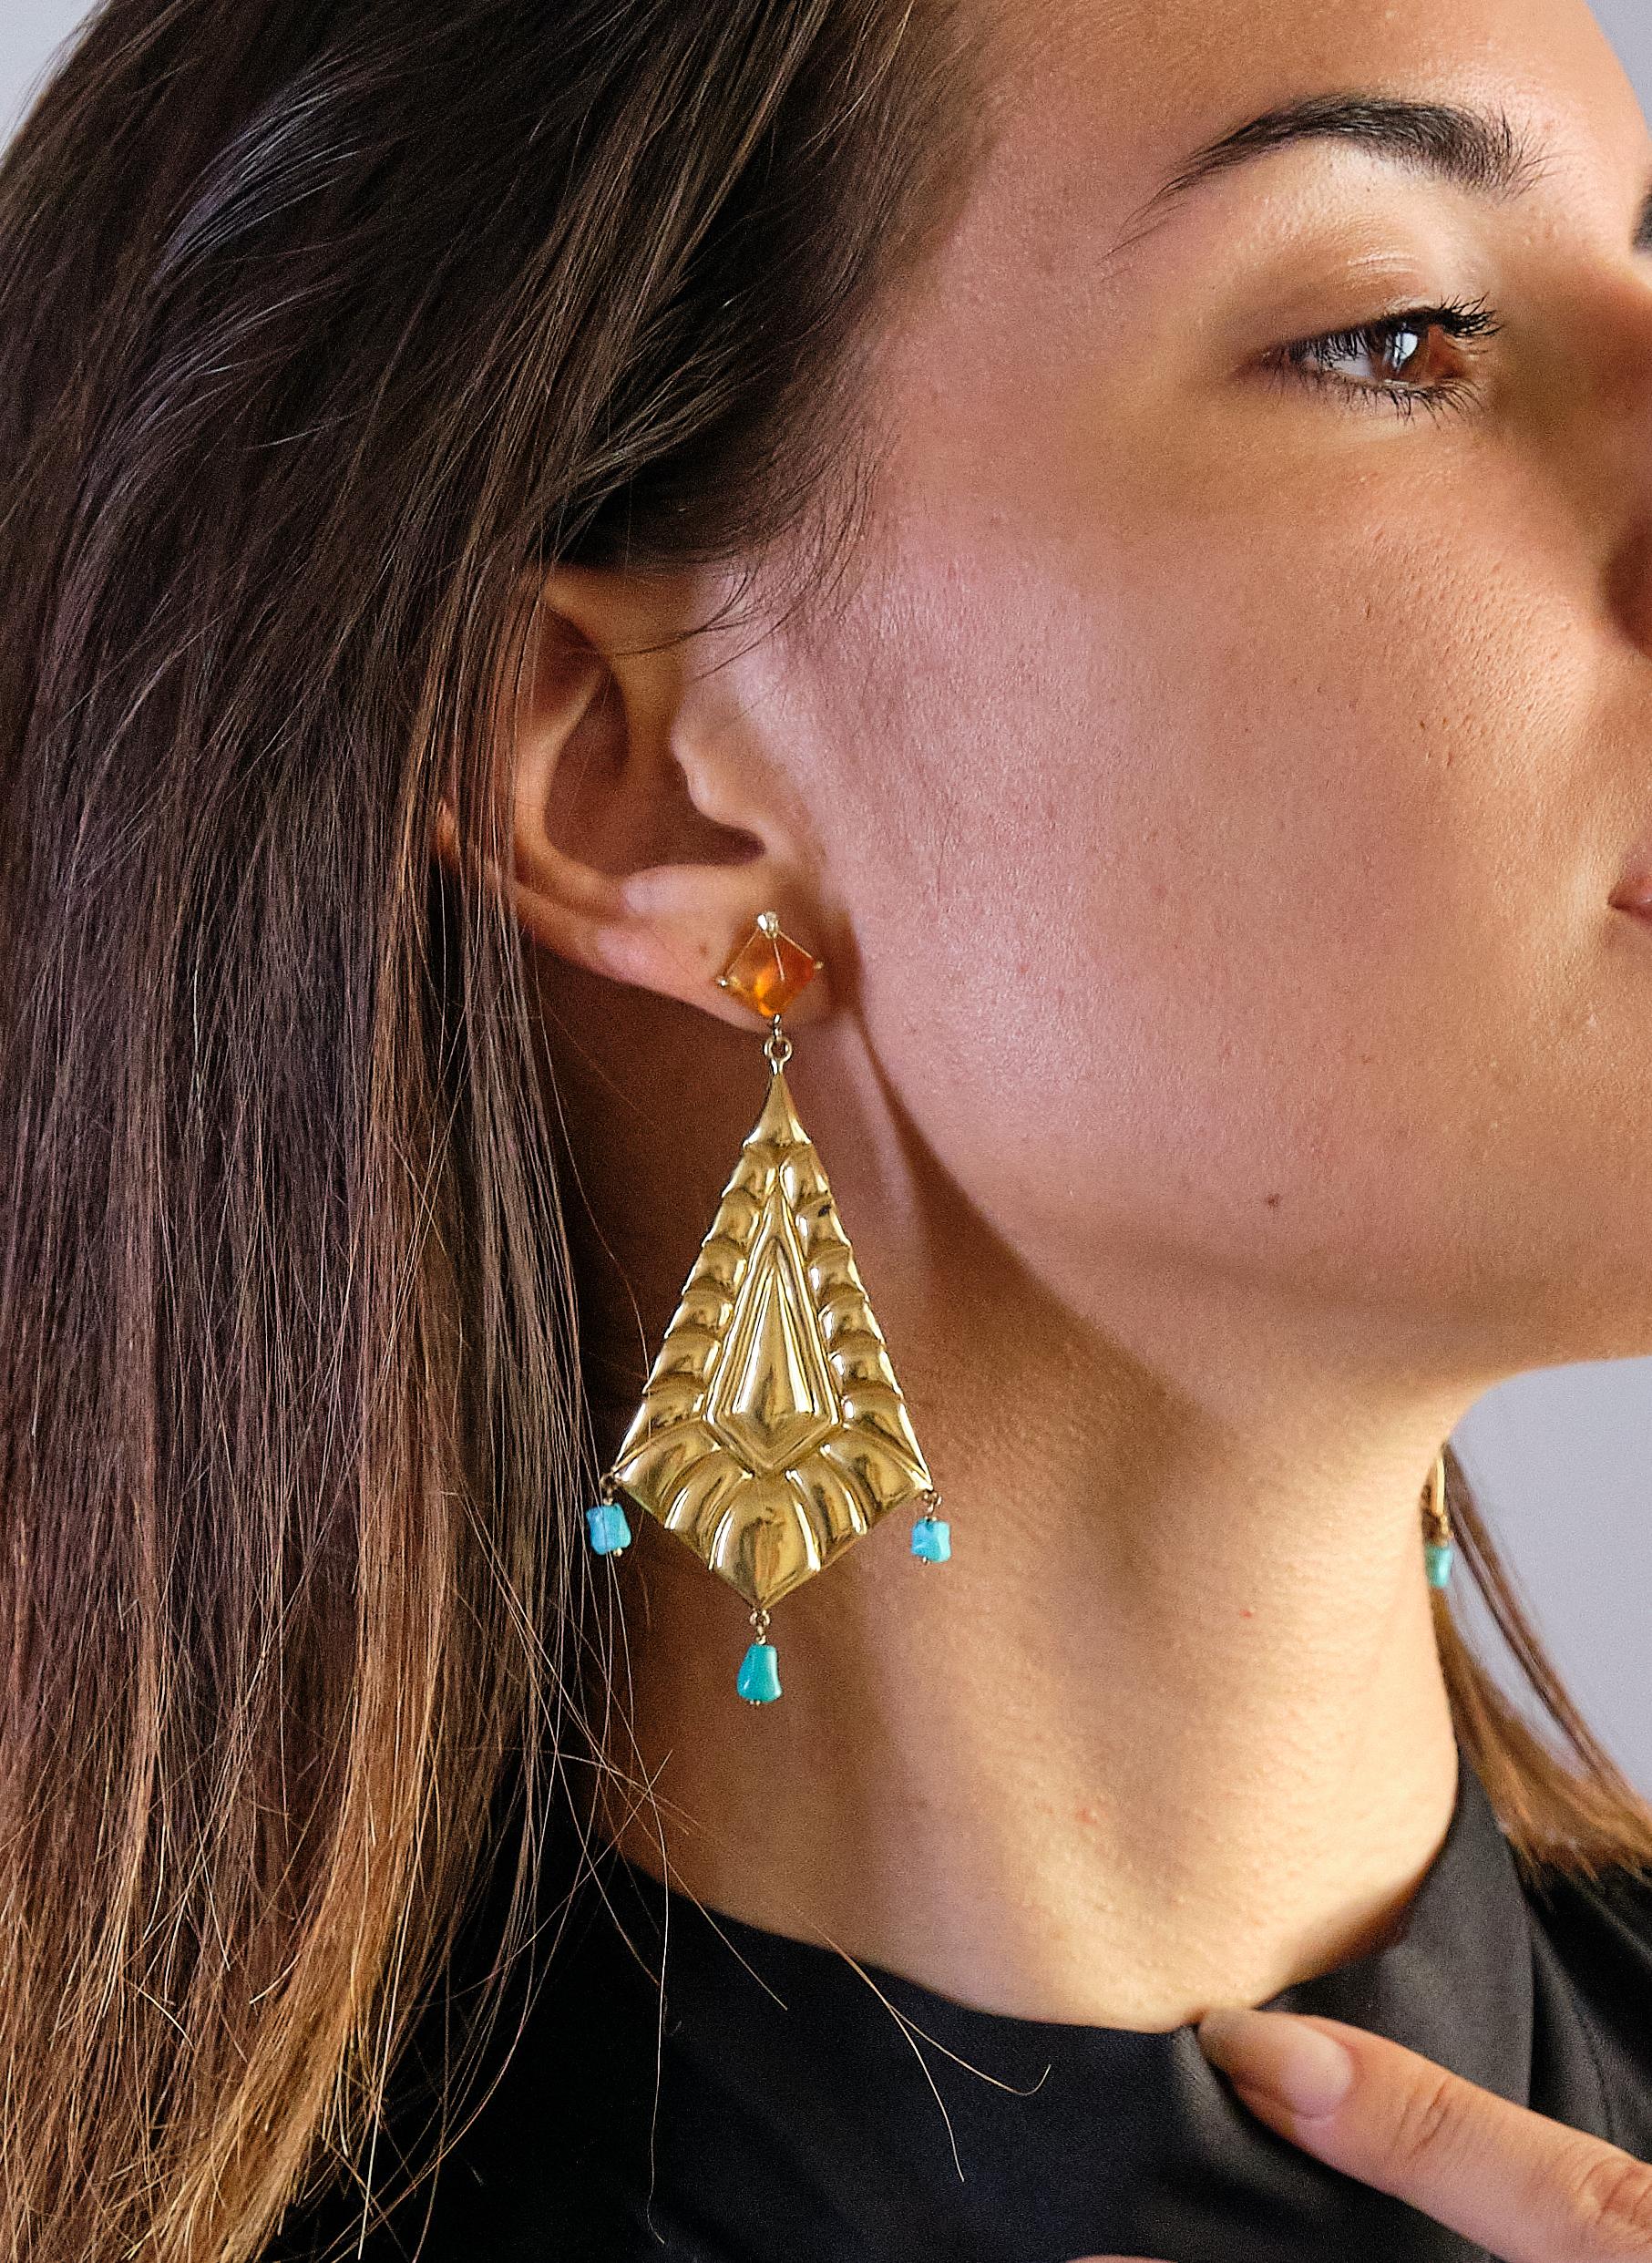 Tan France Auction Pick

Presenting the redesigned Vintage Hexagonal Earrings, crafted with a delicate touch in 18-karat gold by Rossella Ugolini. These earrings stay true to their original 1980s Deco-inspired design, featuring unaltered 18K yellow